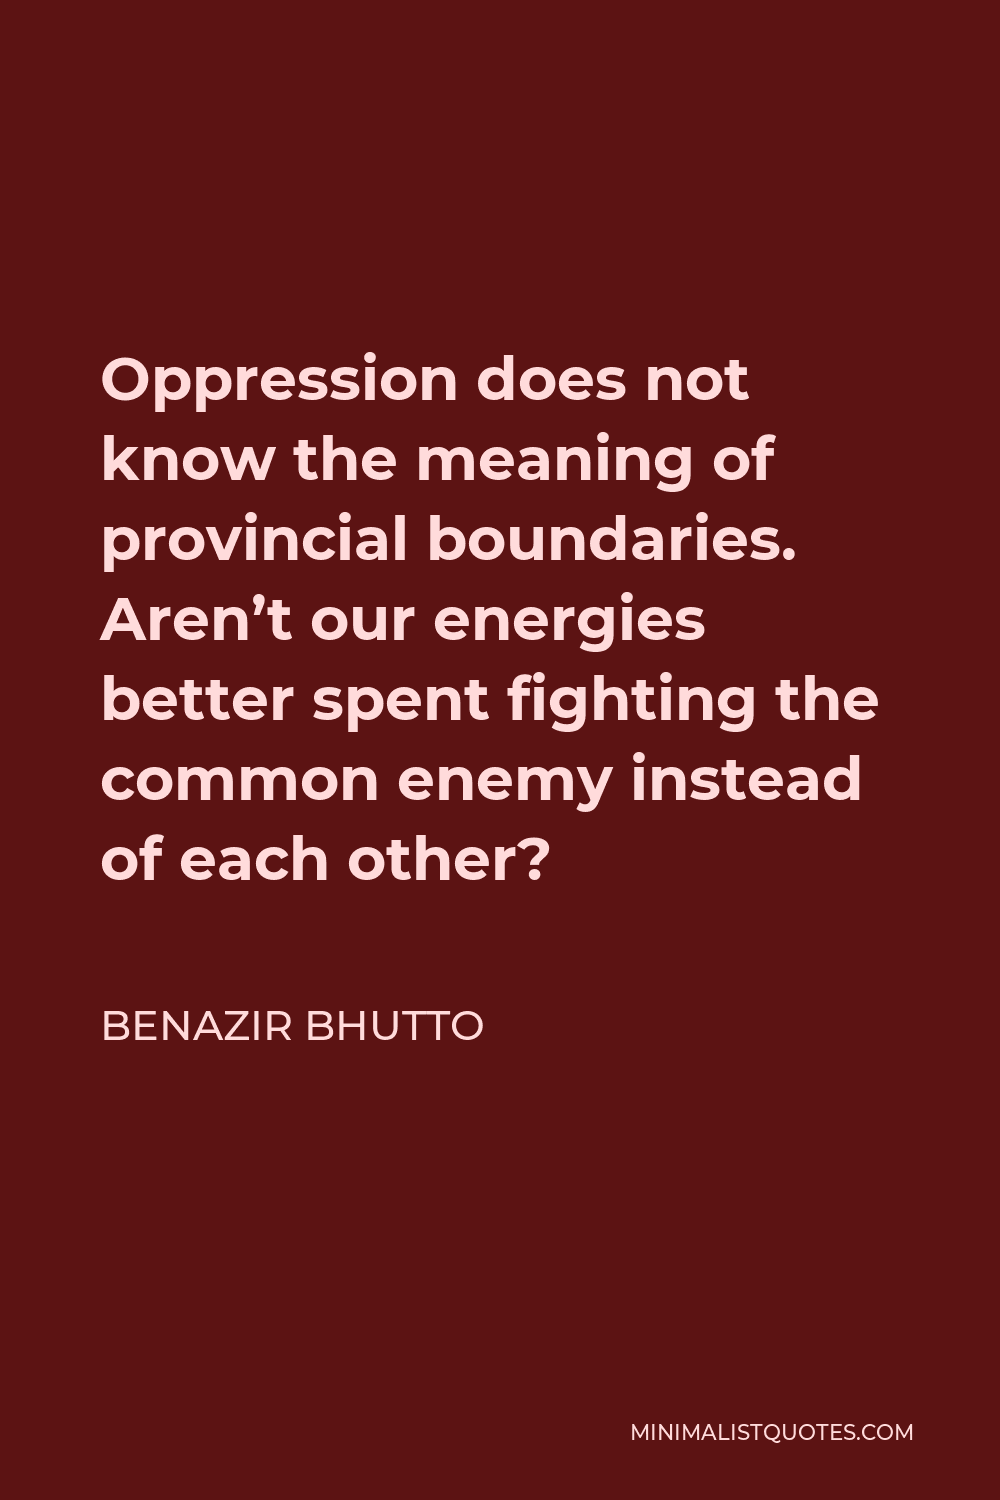 Benazir Bhutto Quote - Oppression does not know the meaning of provincial boundaries. Aren’t our energies better spent fighting the common enemy instead of each other?